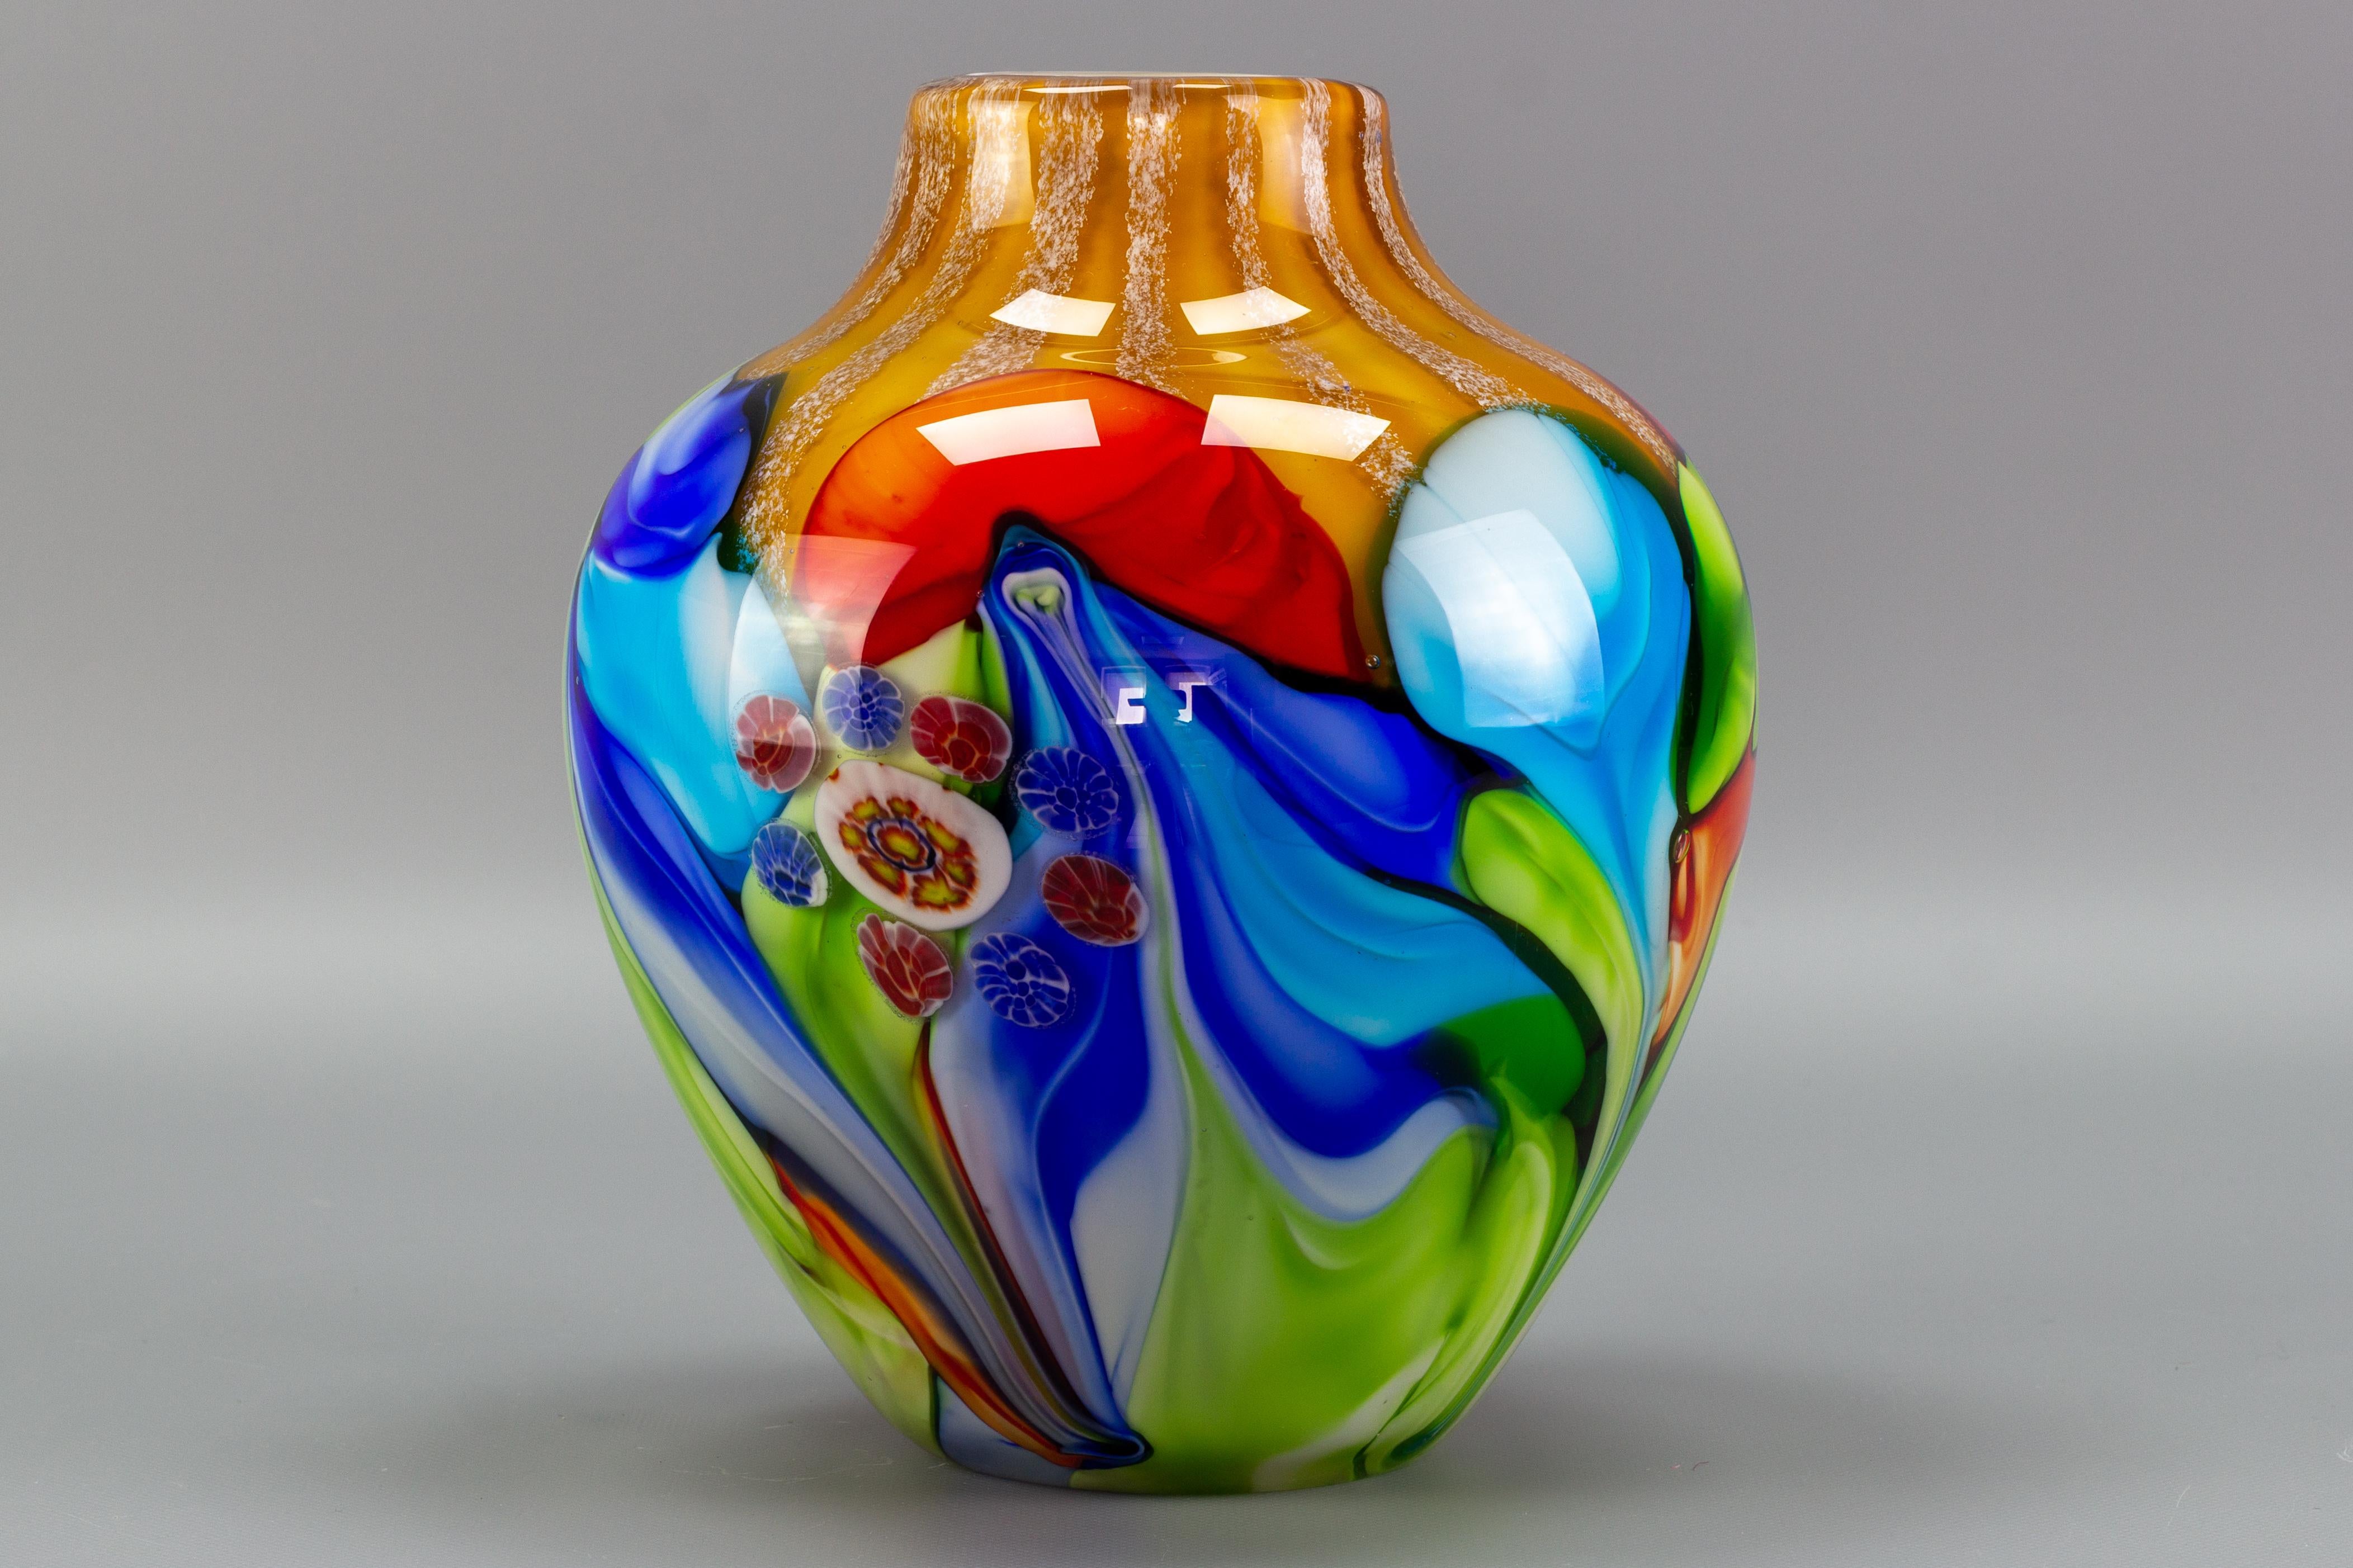 Absolutely gorgeous Murano glass convex vase with Millefiori flowers, attributed to Fratelli Toso. Beautiful and great array of colors - green, blue, red, white and amber, large and heavy vase.
Dimensions: height: 23.5 cm / 9.25 in; diameter: circa